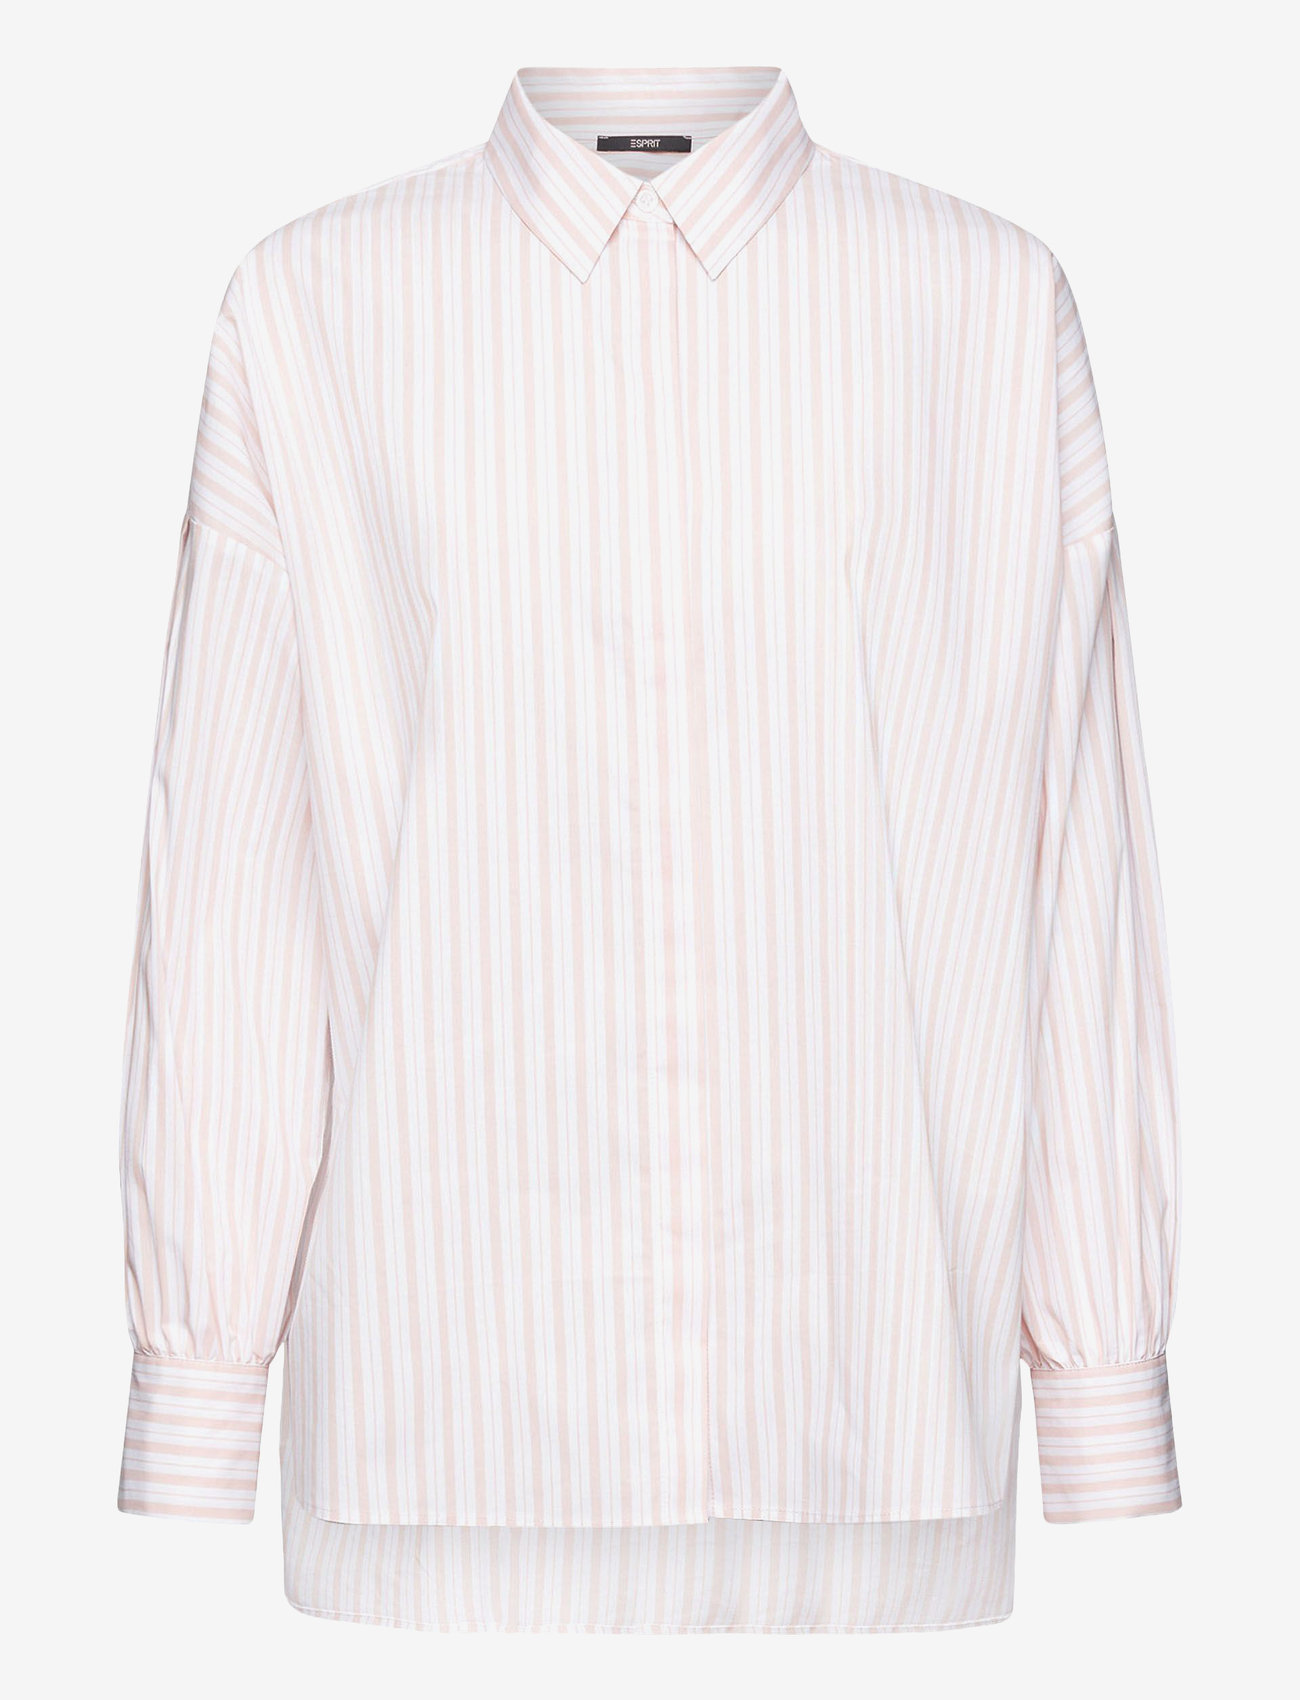 Esprit Collection - Striped oversized high low blouse - pitkähihaiset paidat - white 3 - 0